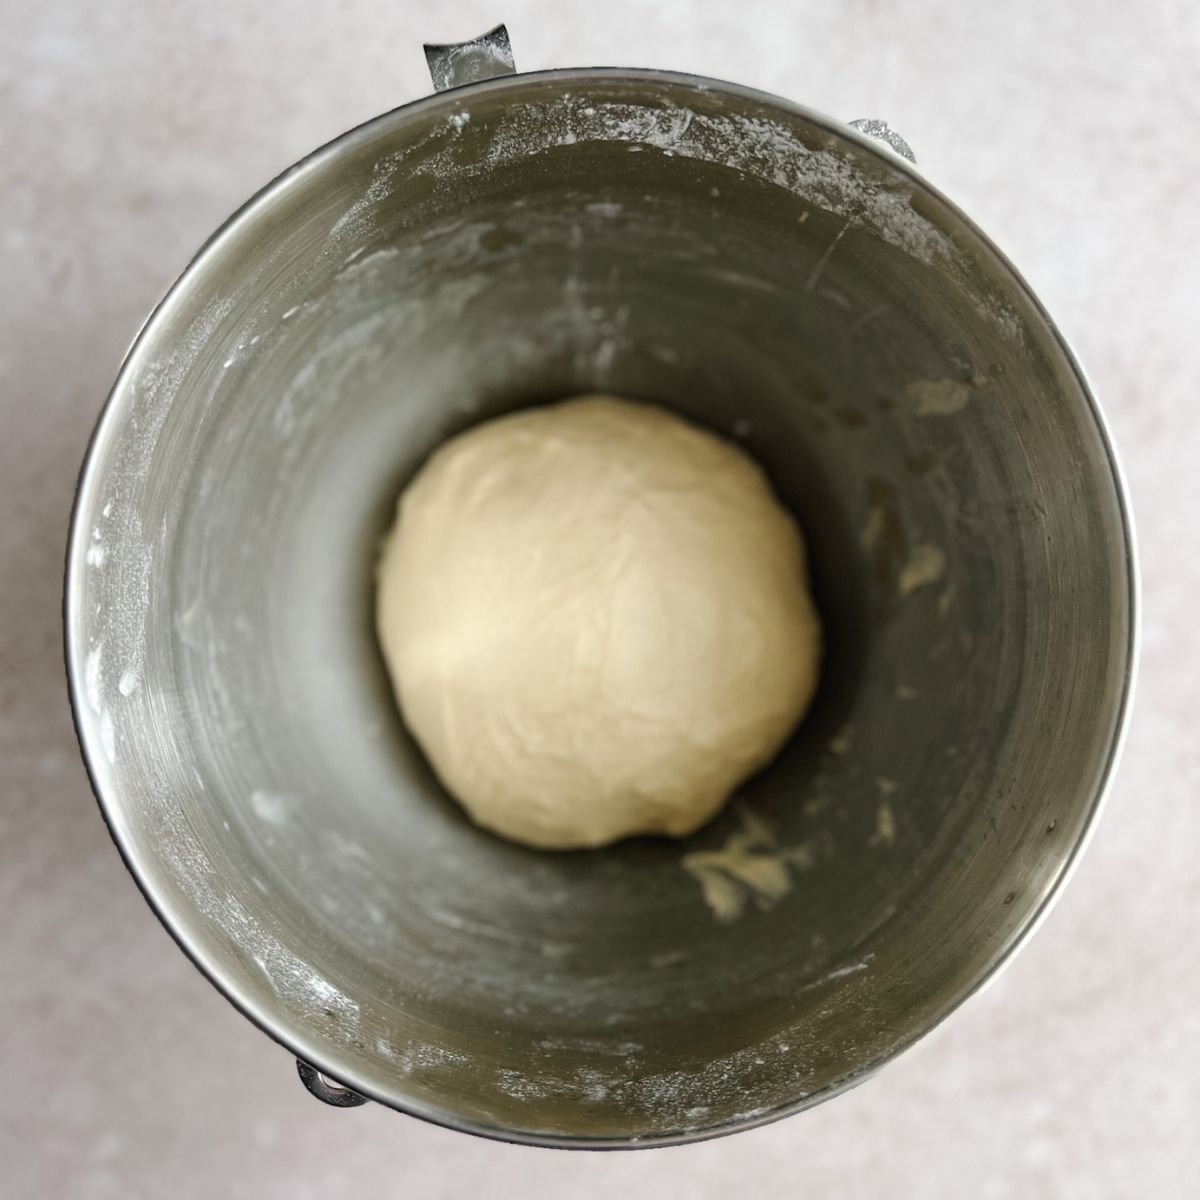 Kneaded ball of dough in a bowl ready to be covered and let rise.